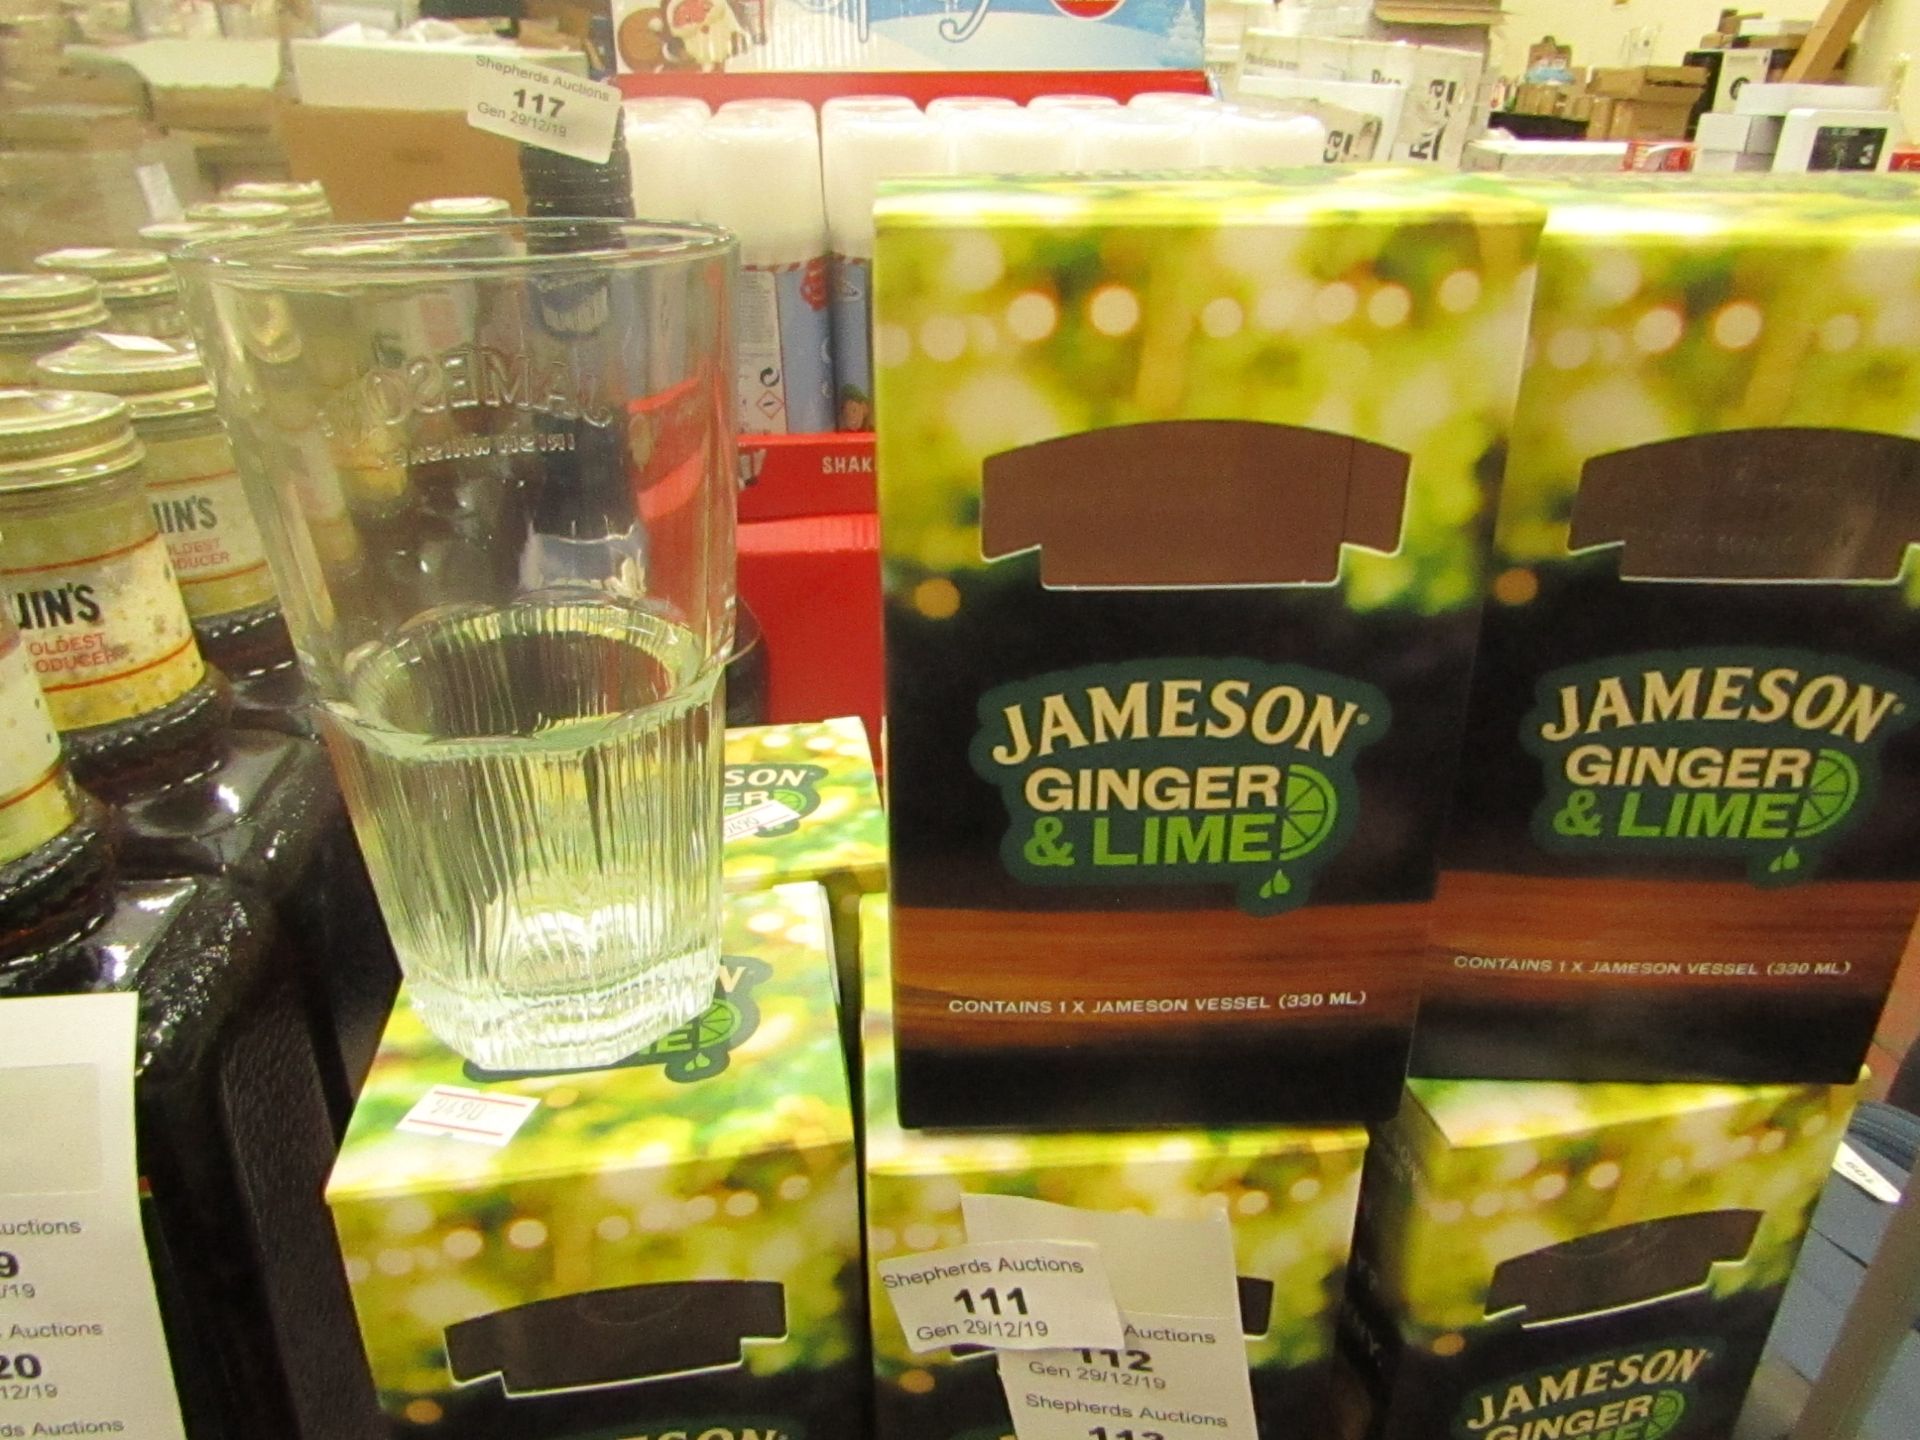 2 x Jamesons Glasses. Perfect for toasting in the New Year. New & Packaged